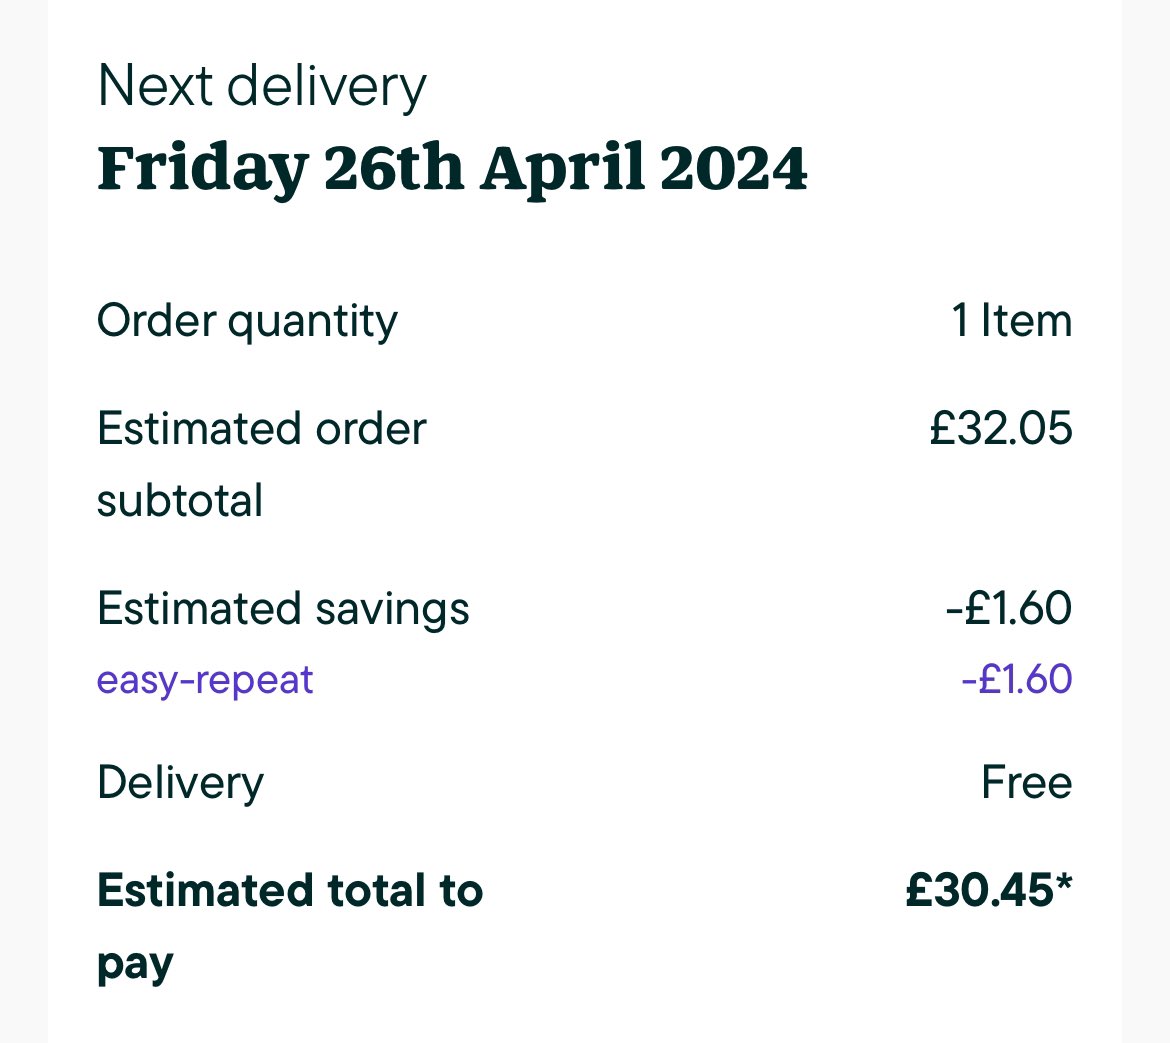 @PetsatHome my dog food order was due on Friday last week, and I haven’t even had a shipping notification yet. Running out of food now, so what should I do?!